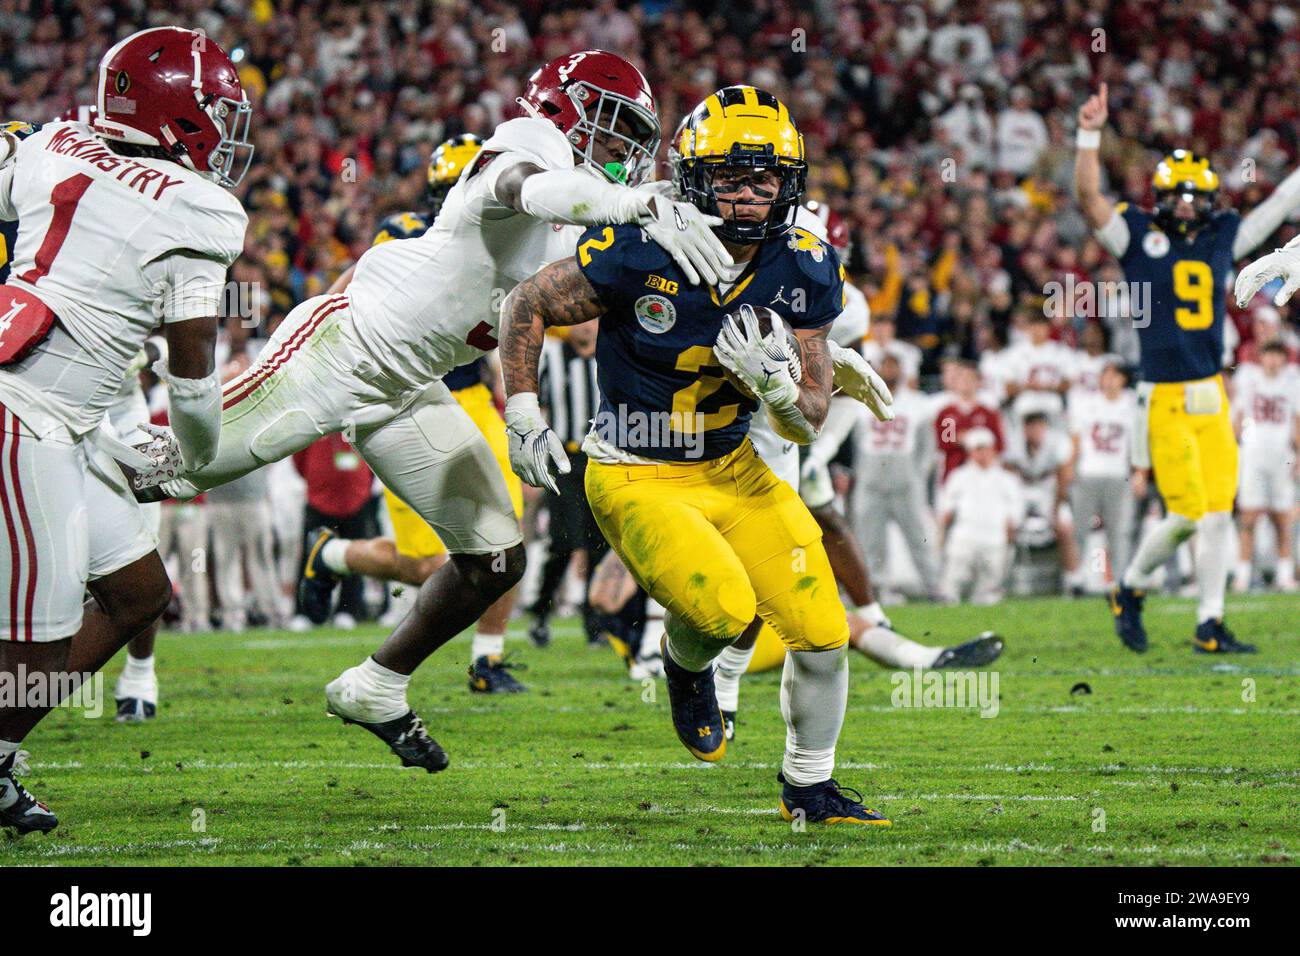 Michigan Wolverines running back Blake Corum (2) runs the ball for the winning touchdown during overtime of the CFP Semifinal at the Rose Bowl Game ag Stock Photo